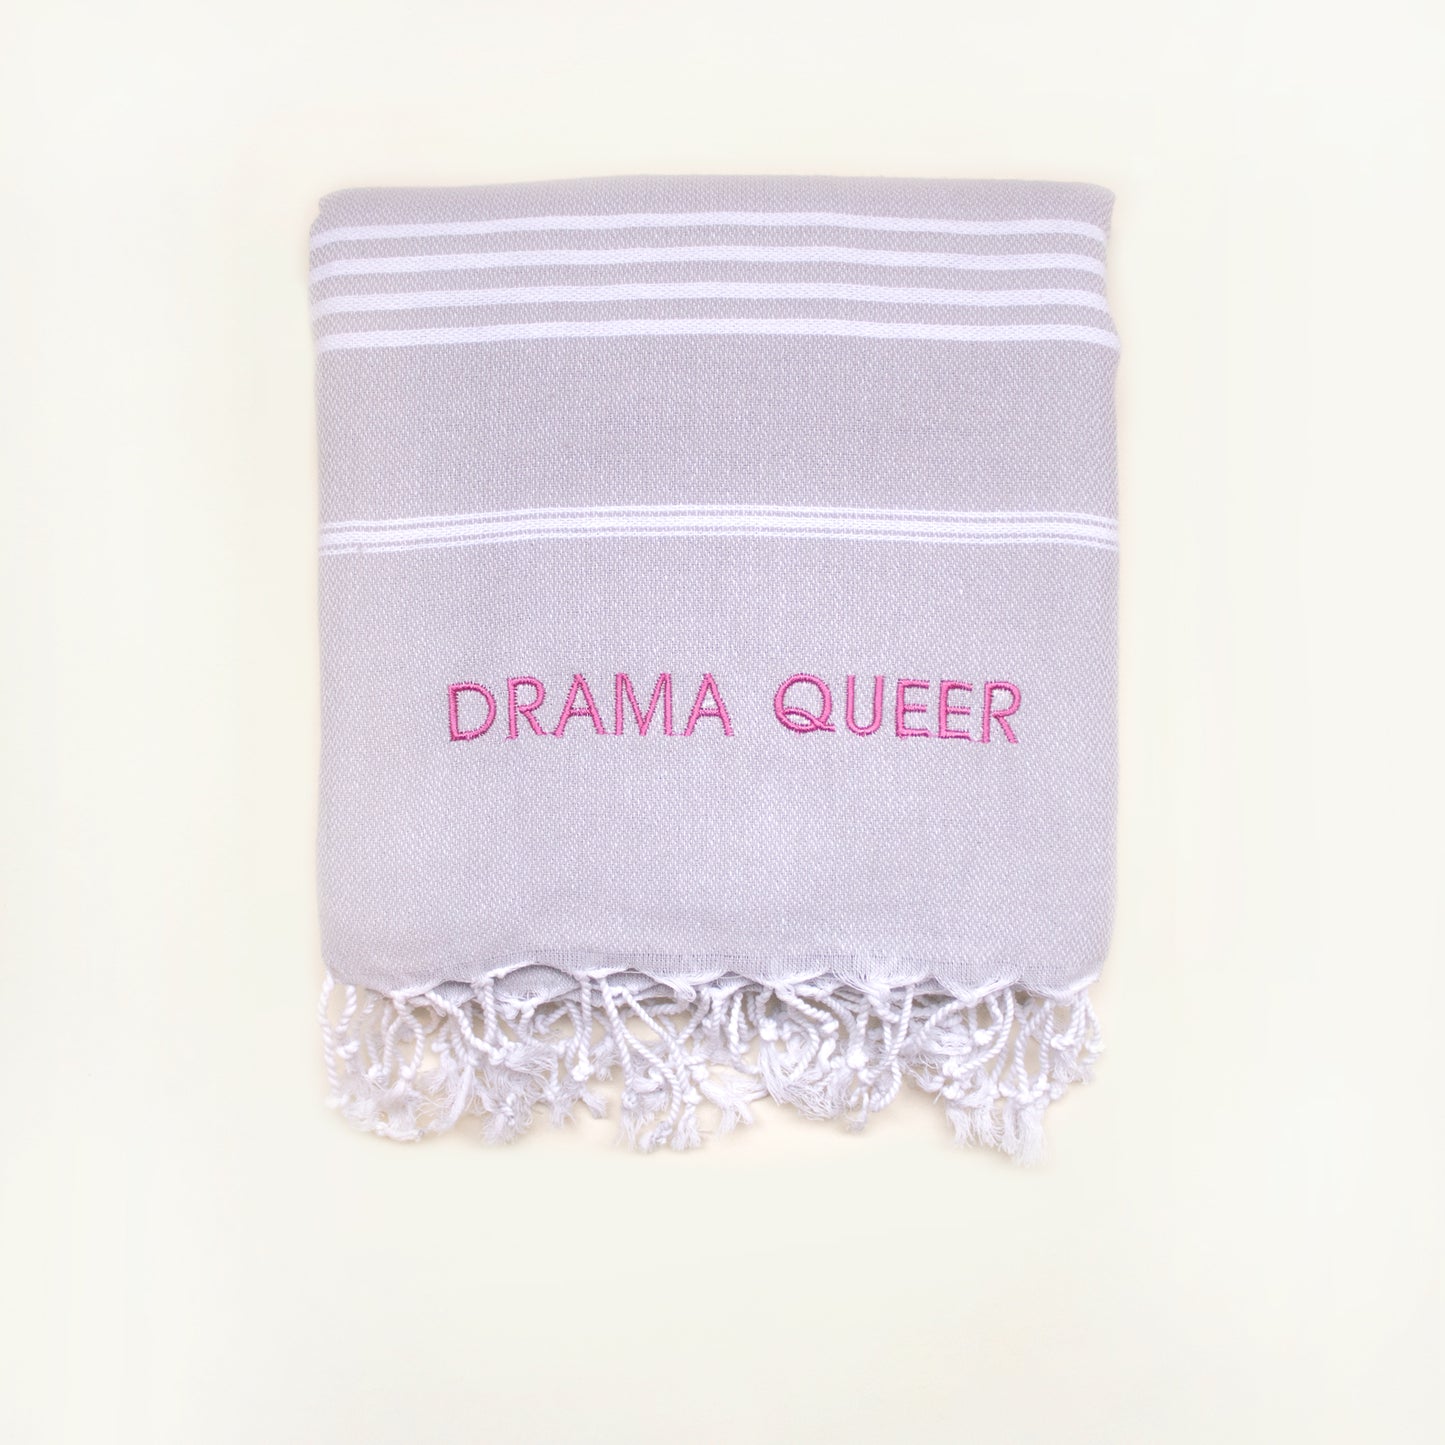 "DRAMA QUEER" Embroidered Turkish Towel